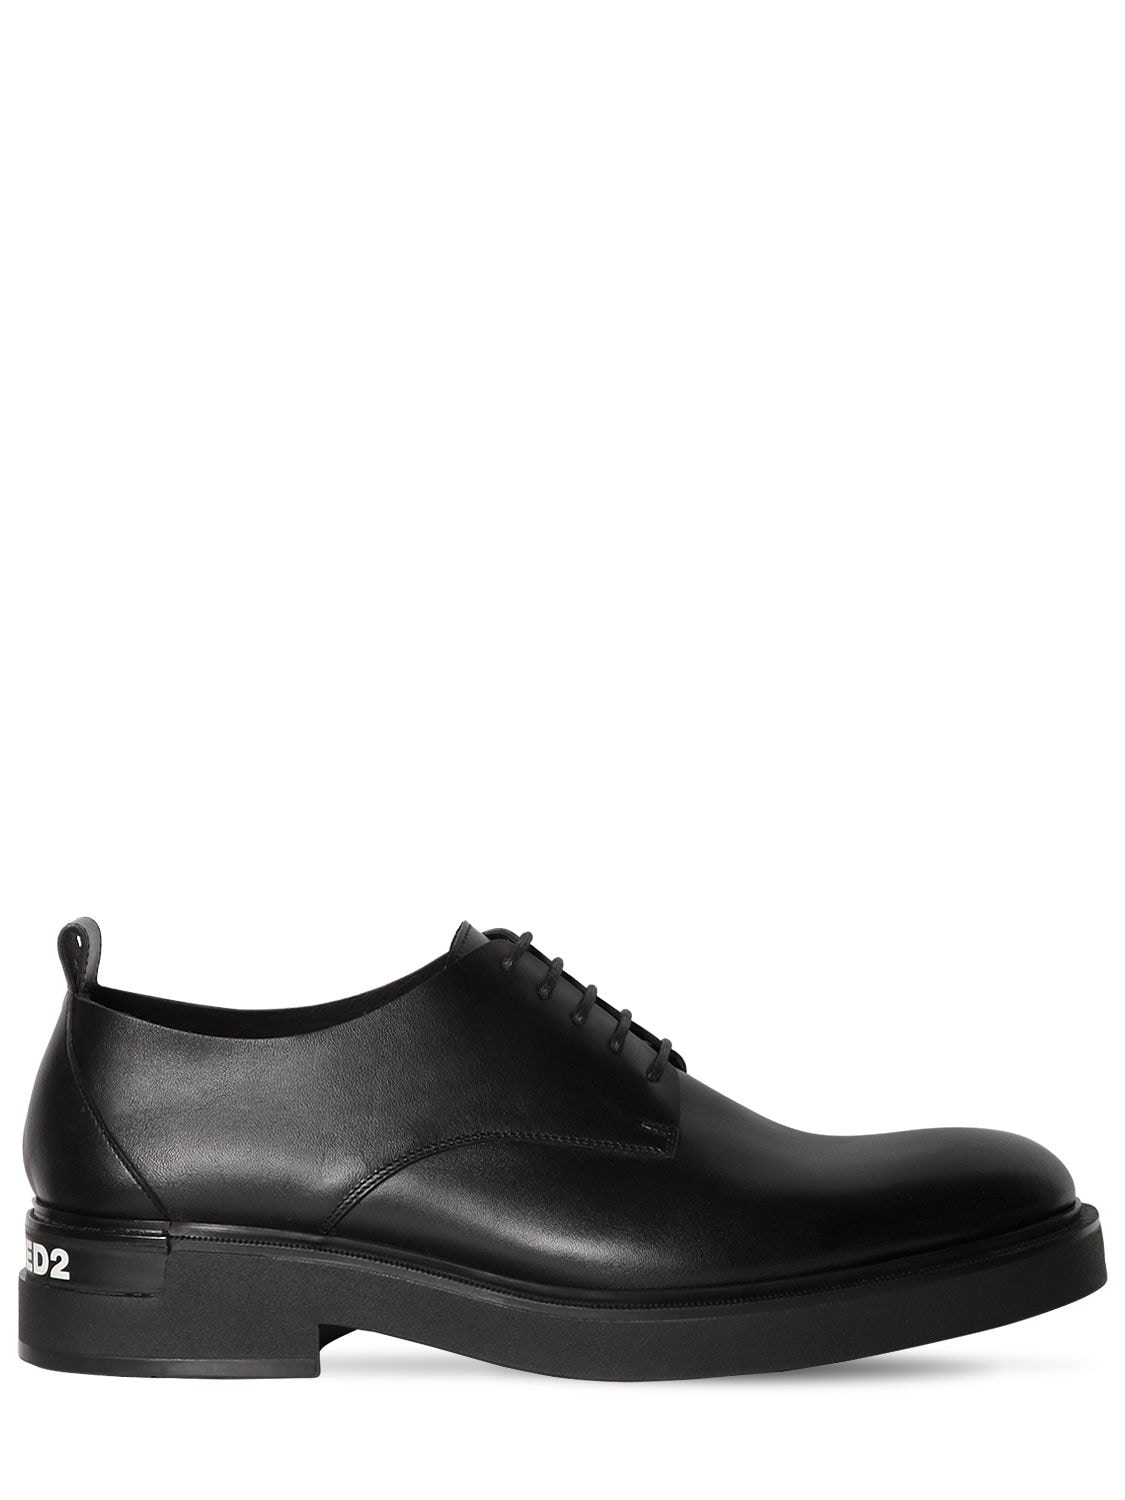 Dsquared2 - 45mm leather derby shoes - Black | Luisaviaroma